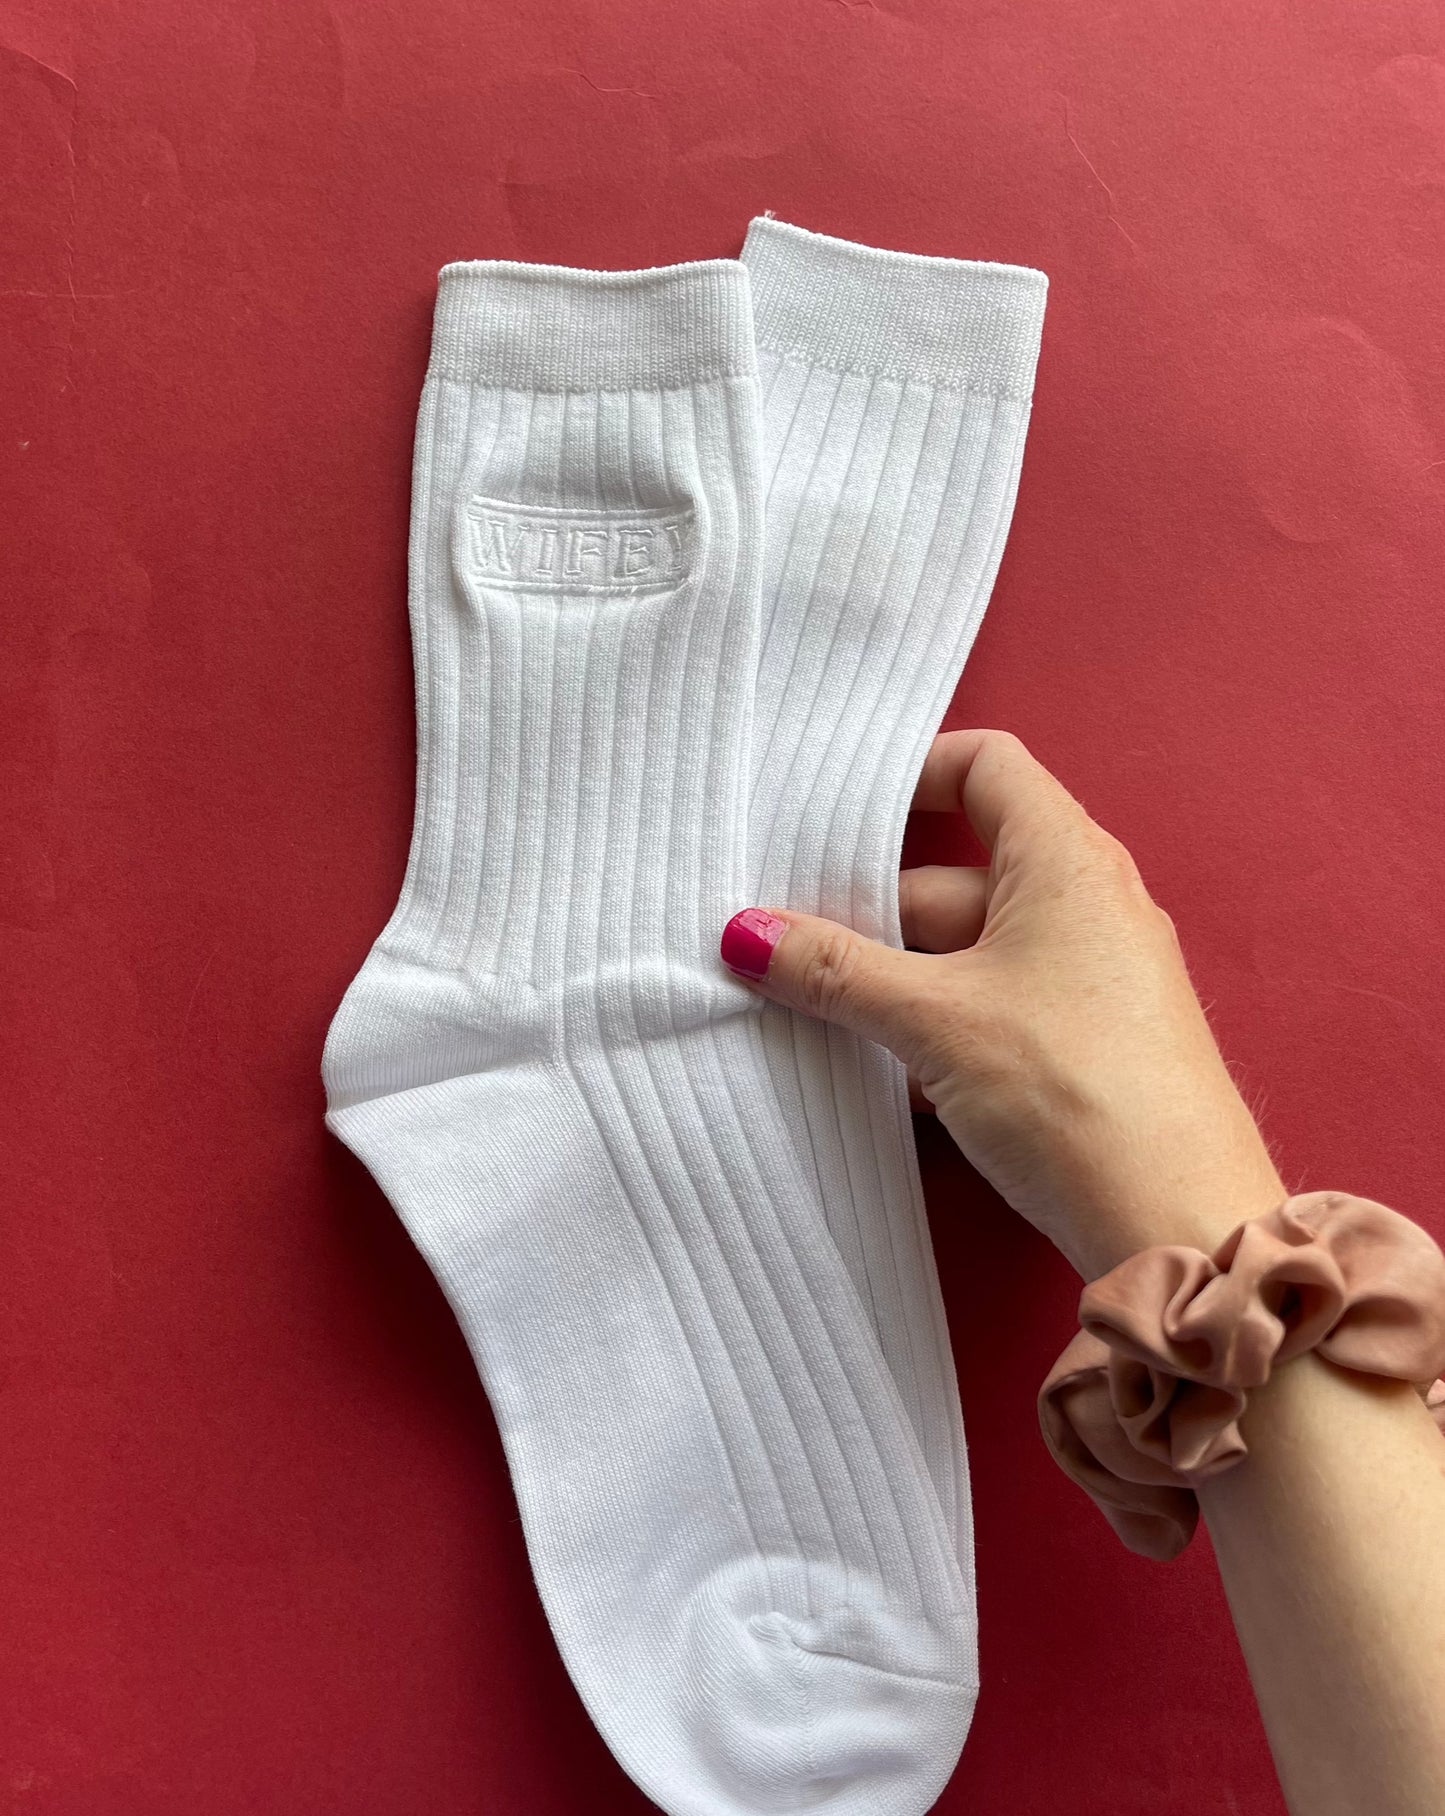 Embroidered Wifey Bride Socks